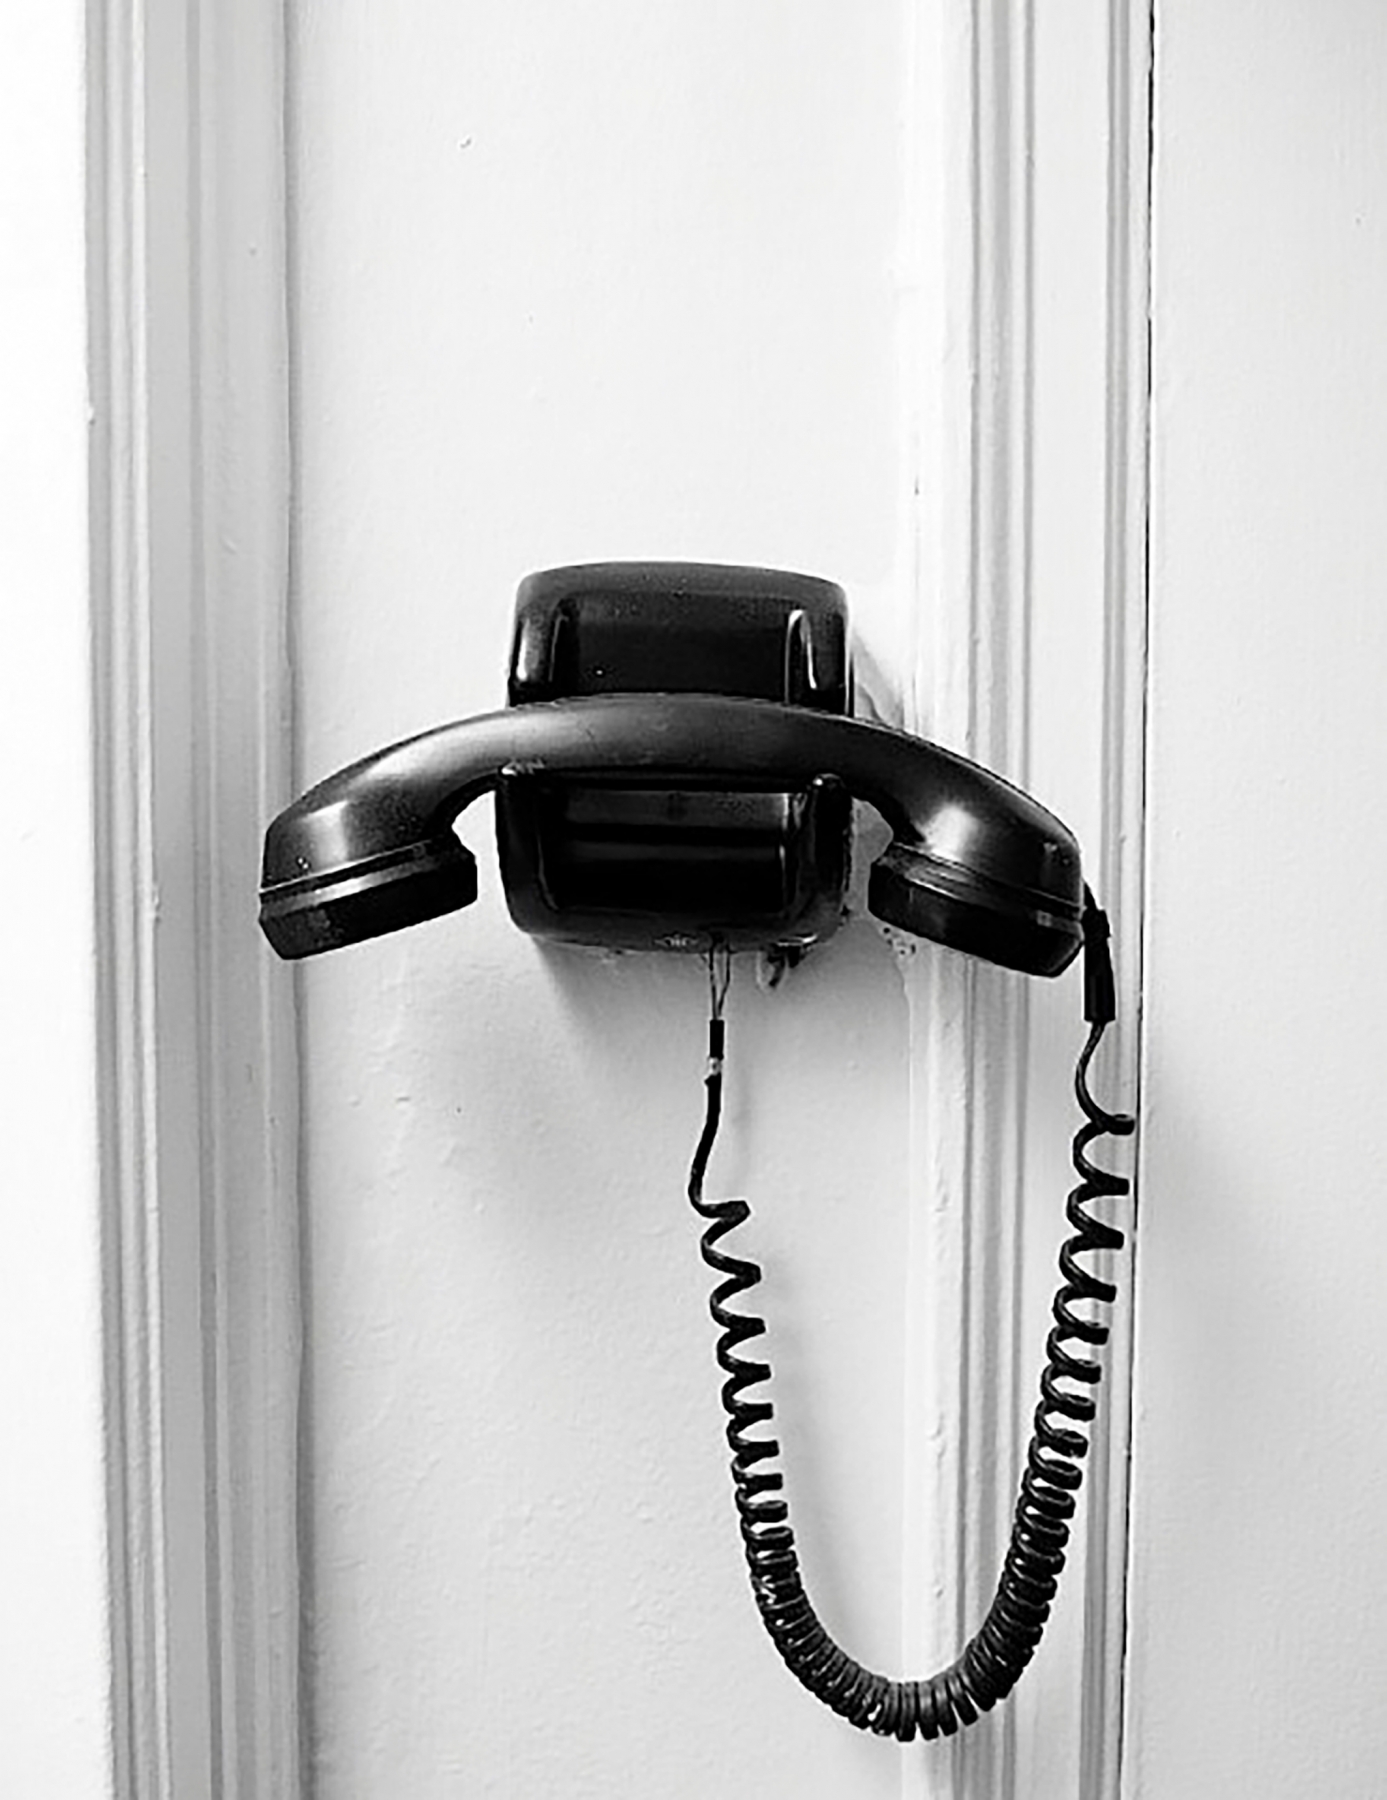 Found image
Wall mounted telephone